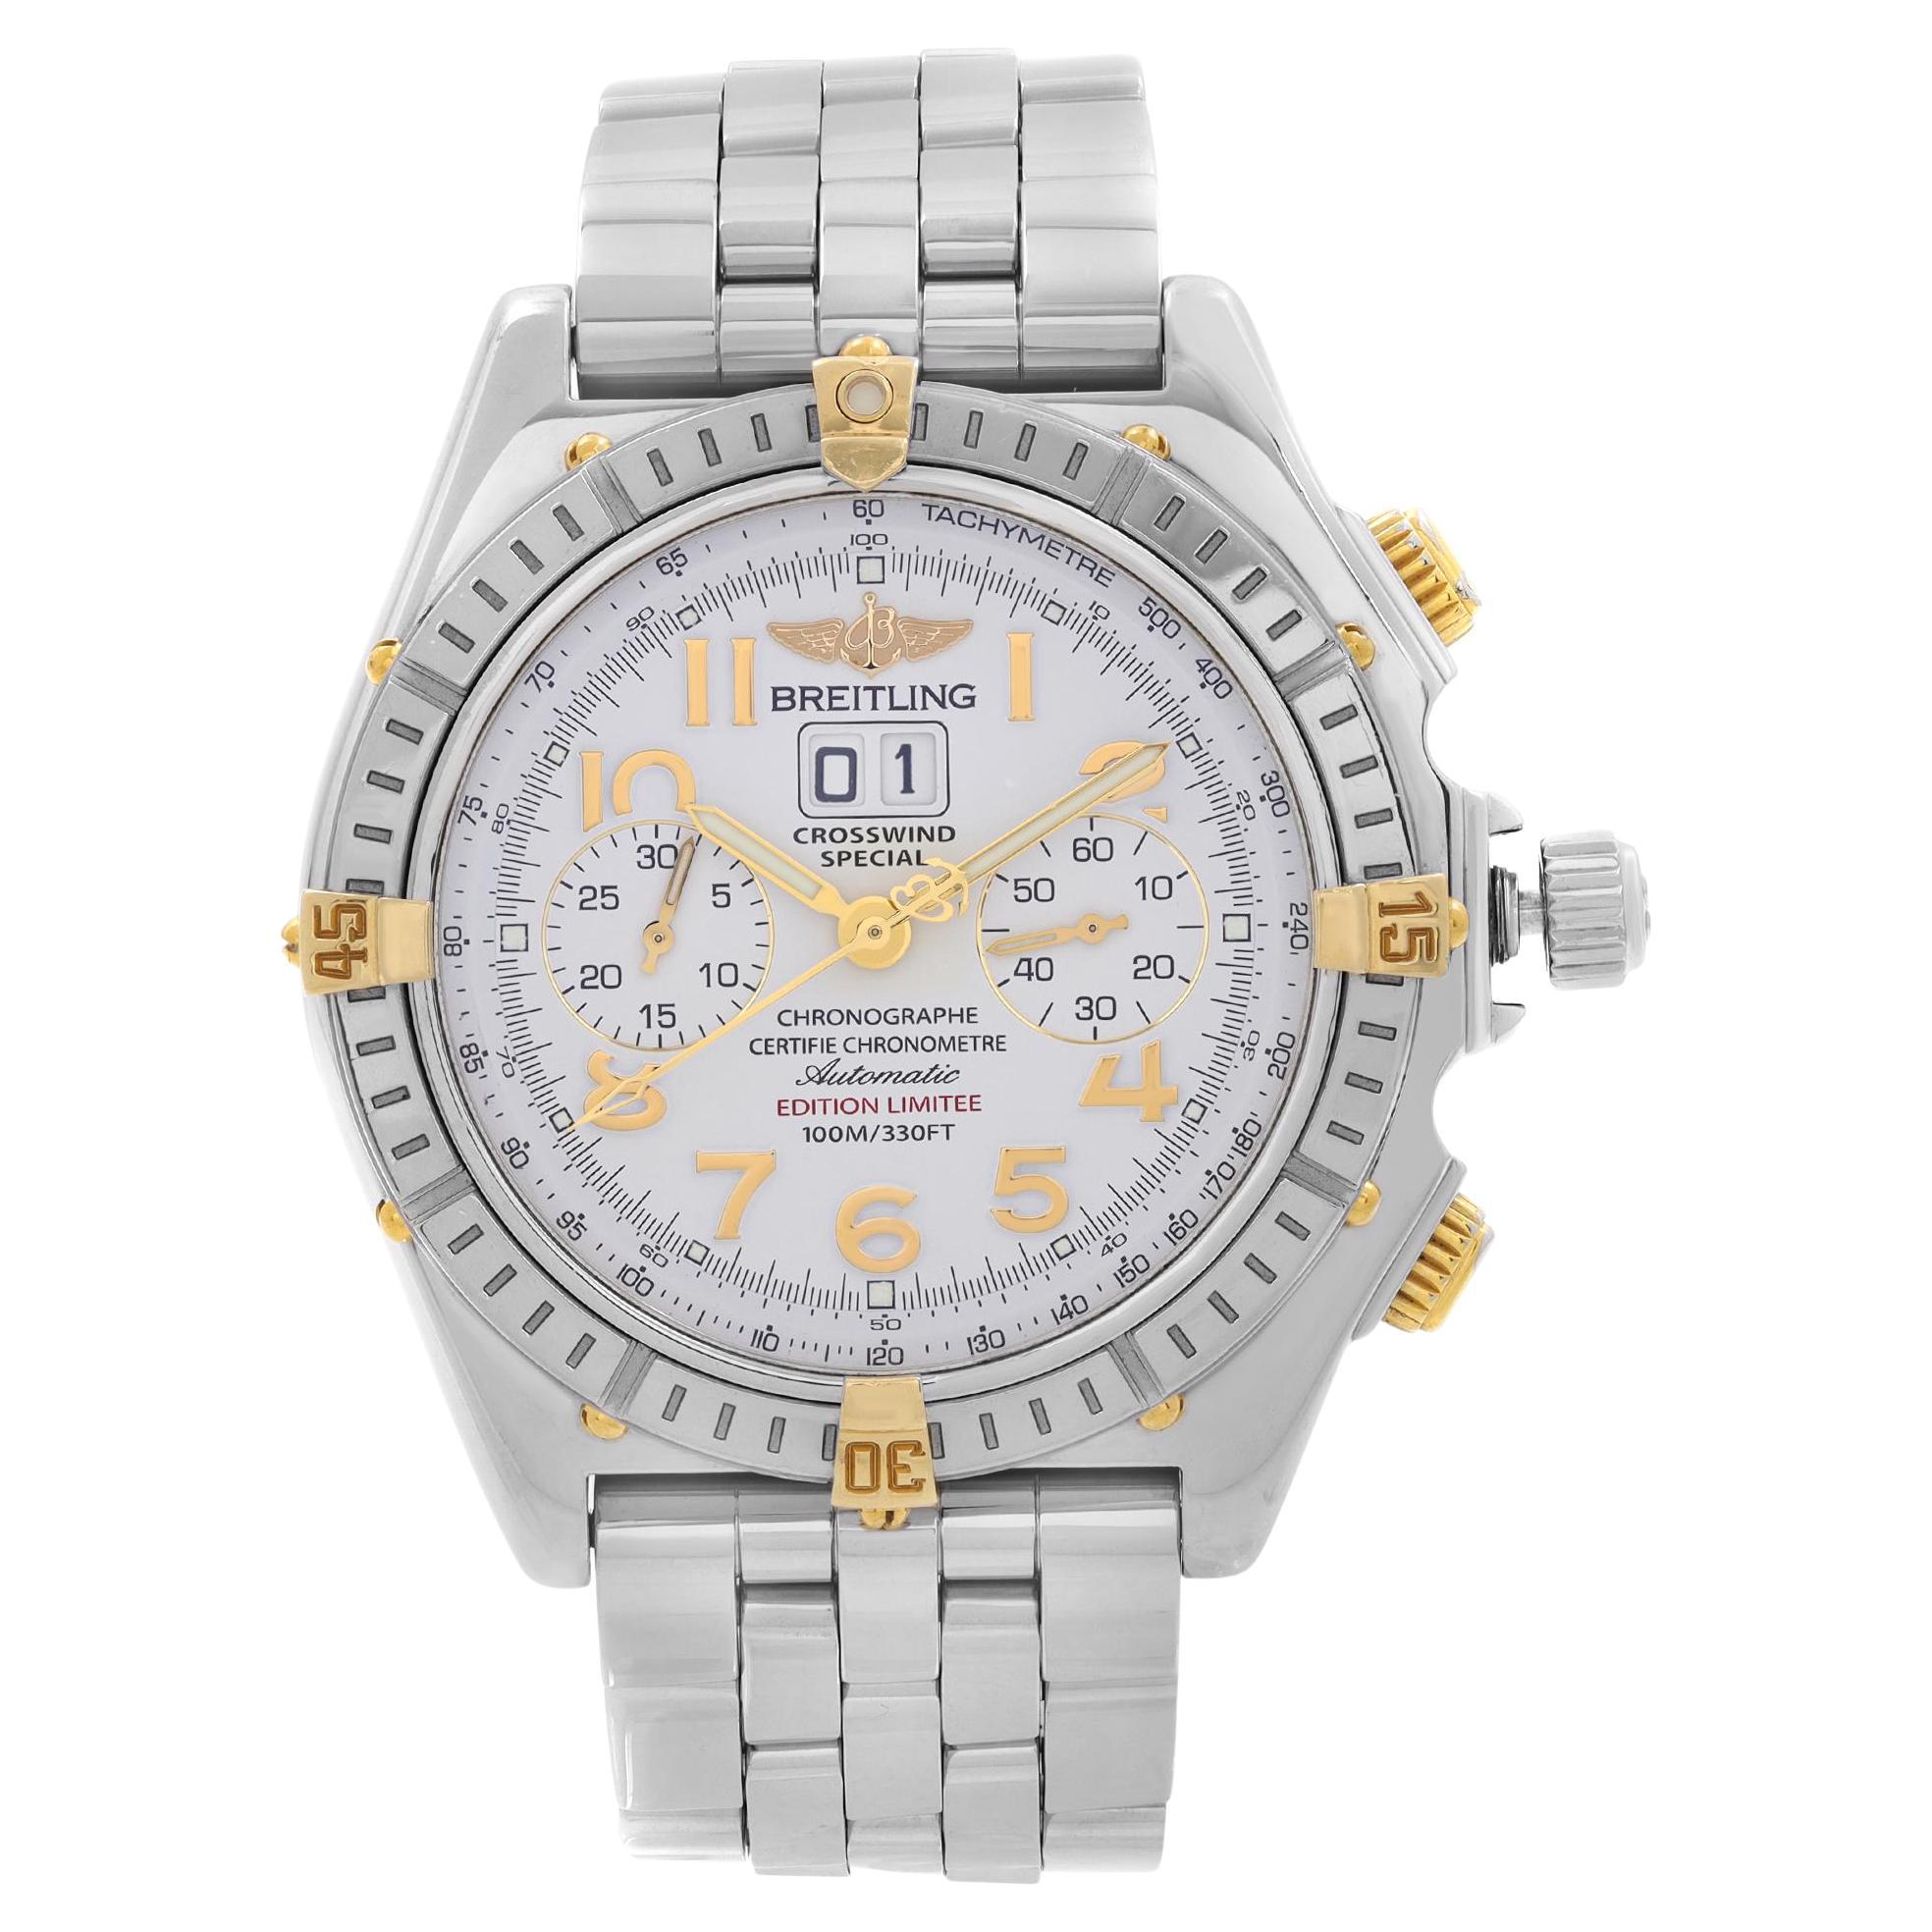 Breitling Crosswind Limited Steel White Dial Automatic Watch B44356 For Sale